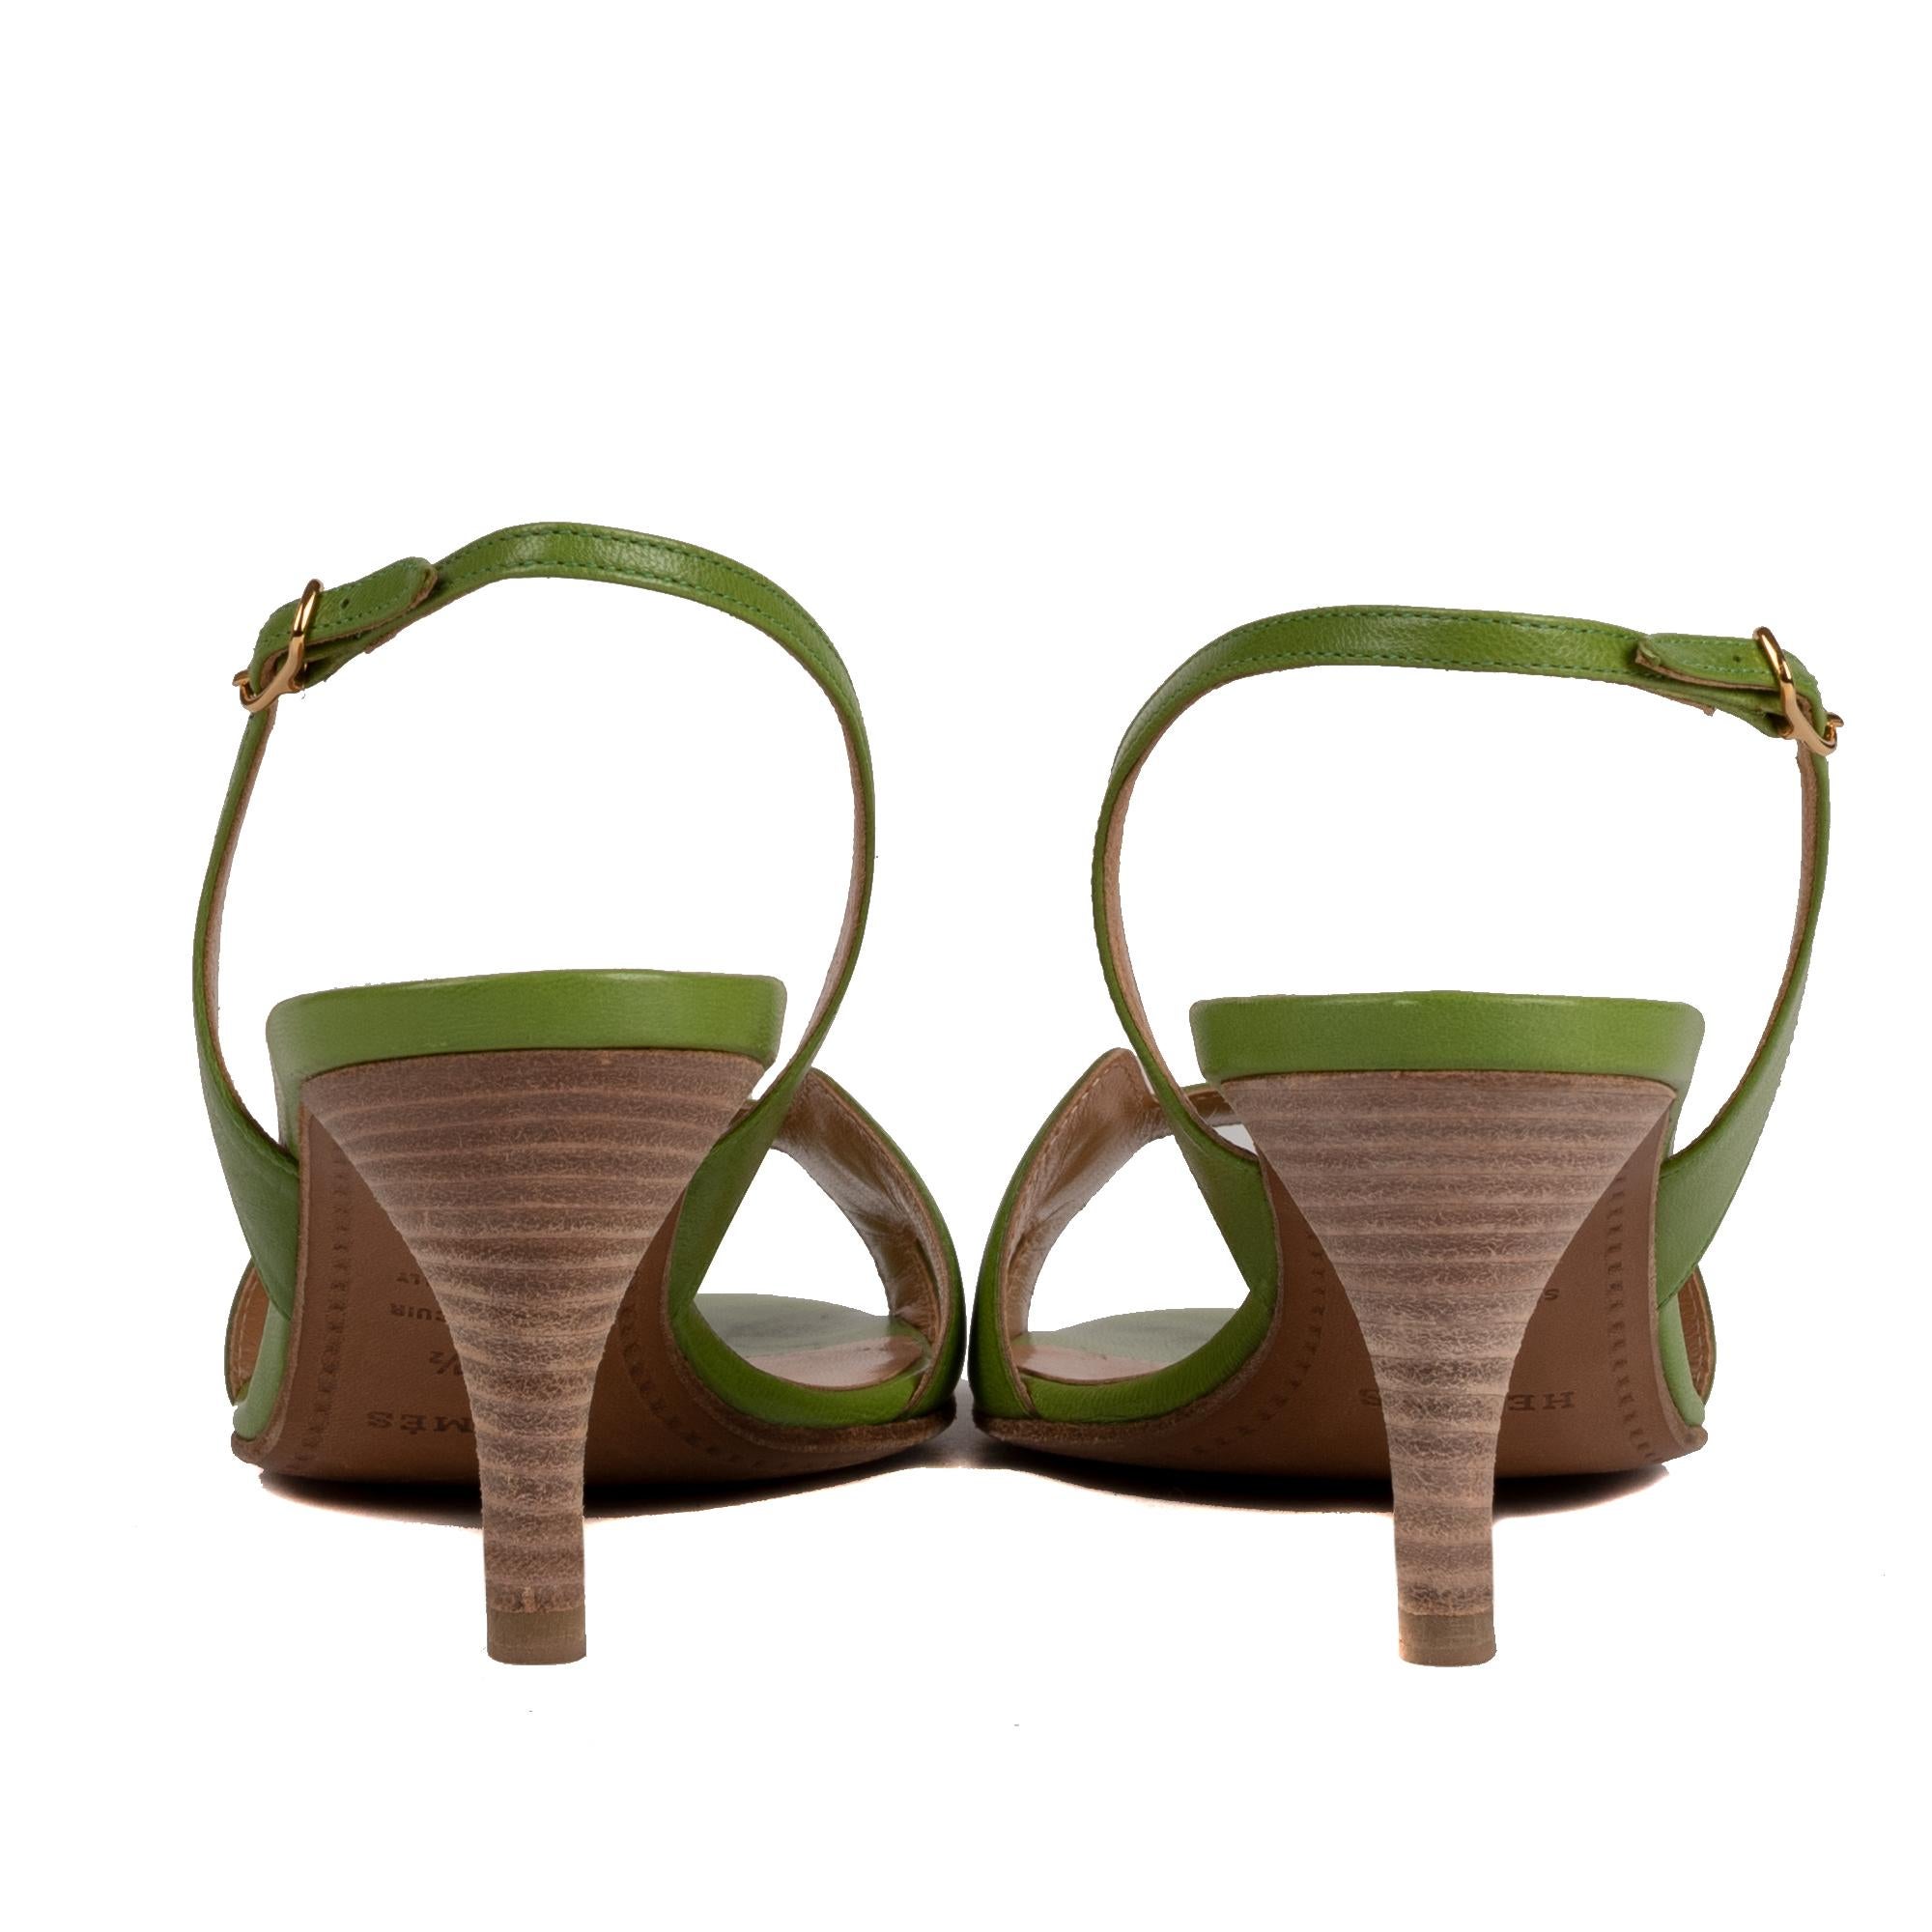 Brown Hermès Night Sandals in green leather, size 36, 5, very good condition !